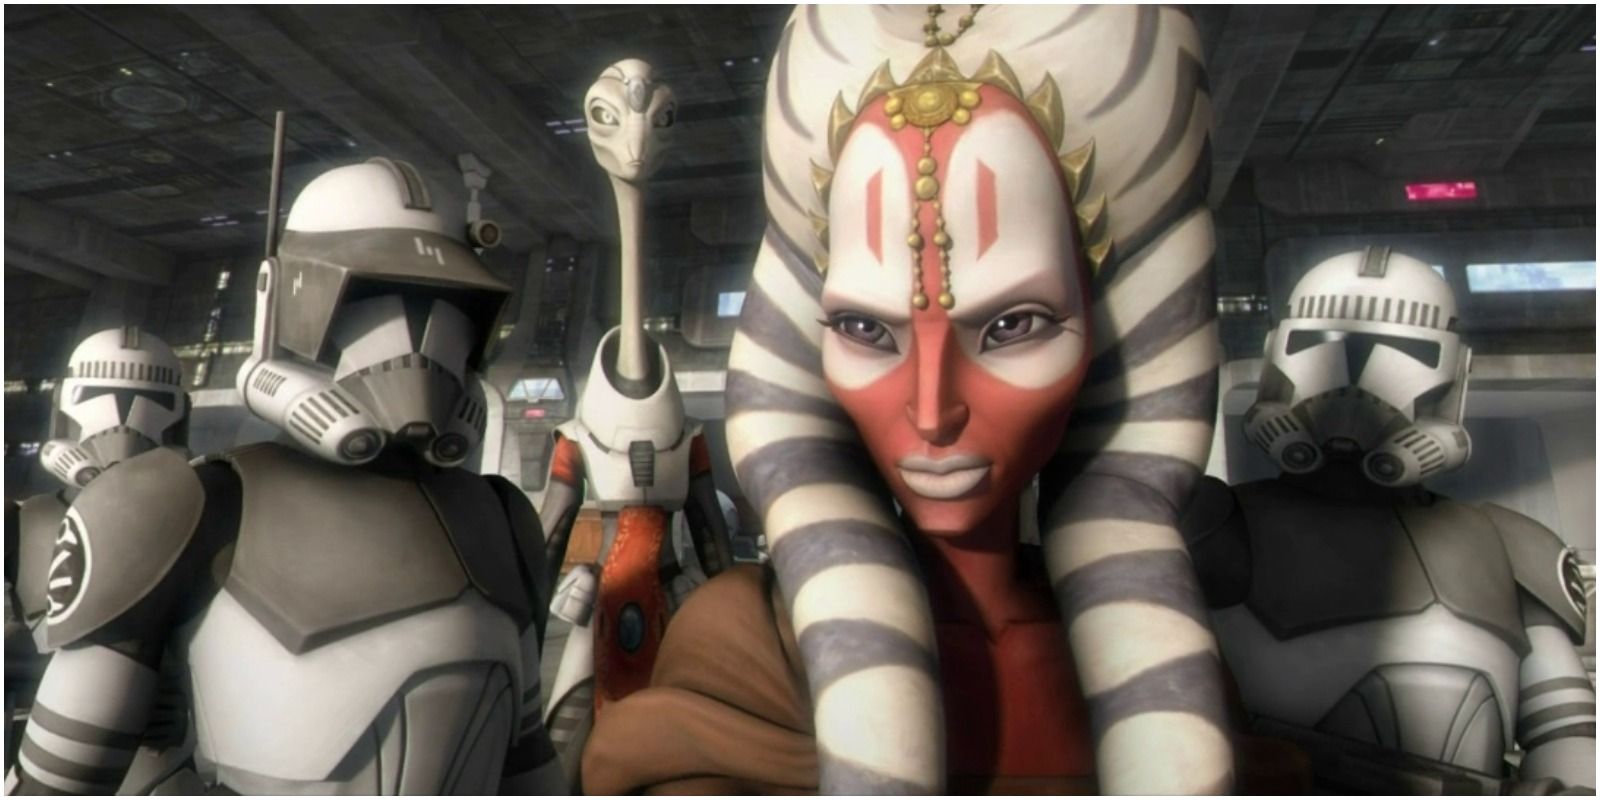 Shaak Ti flanked by Clones